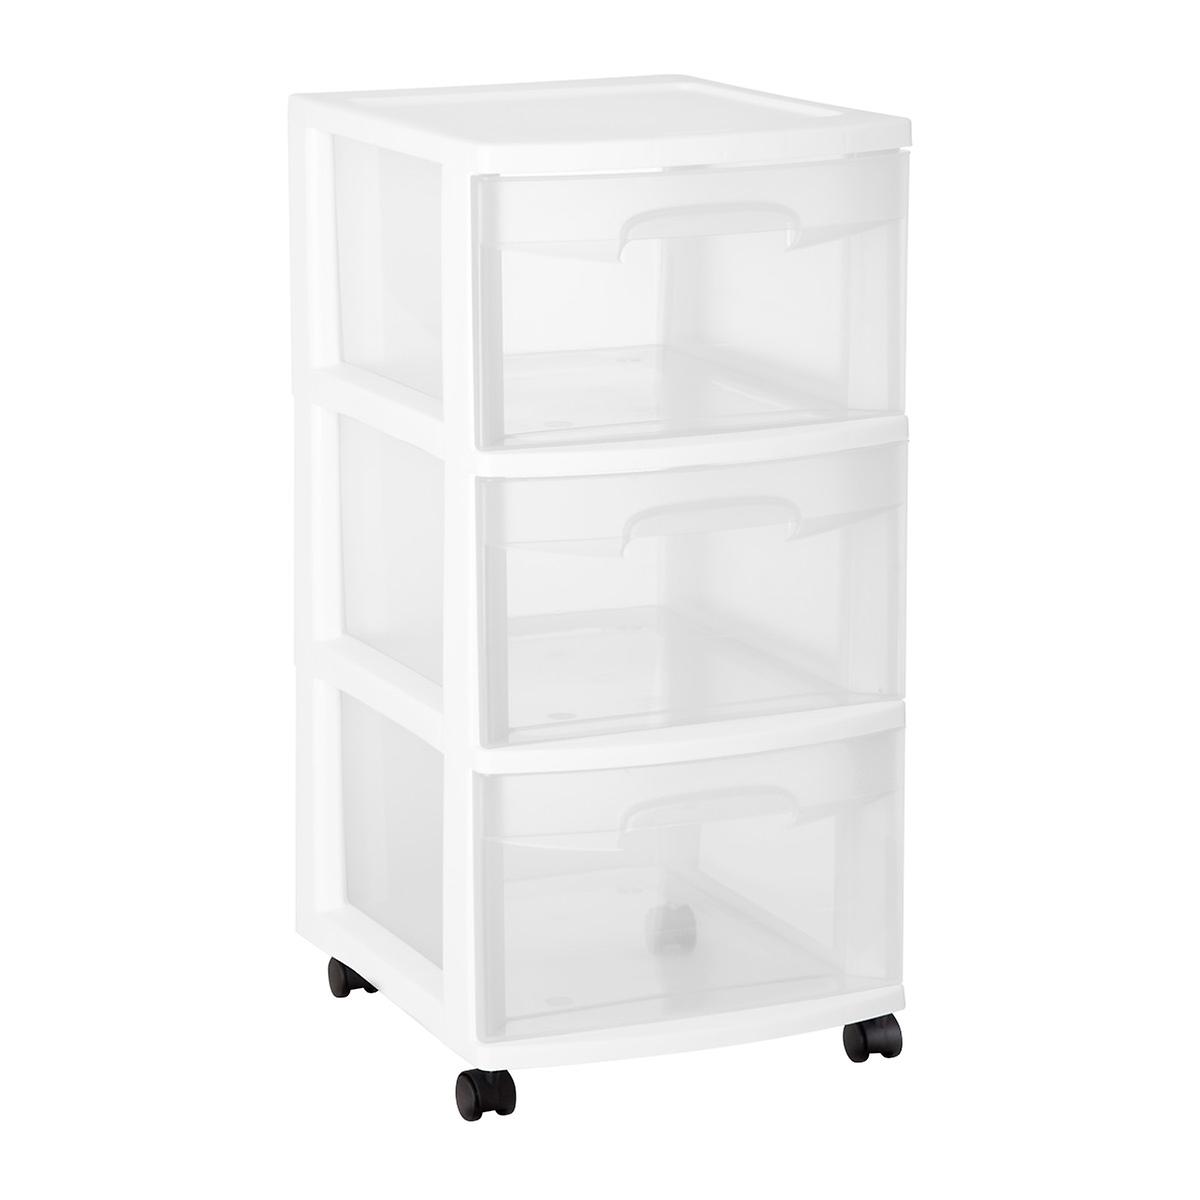 Sterilite 3 Drawer Chest With Wheels The Container Store